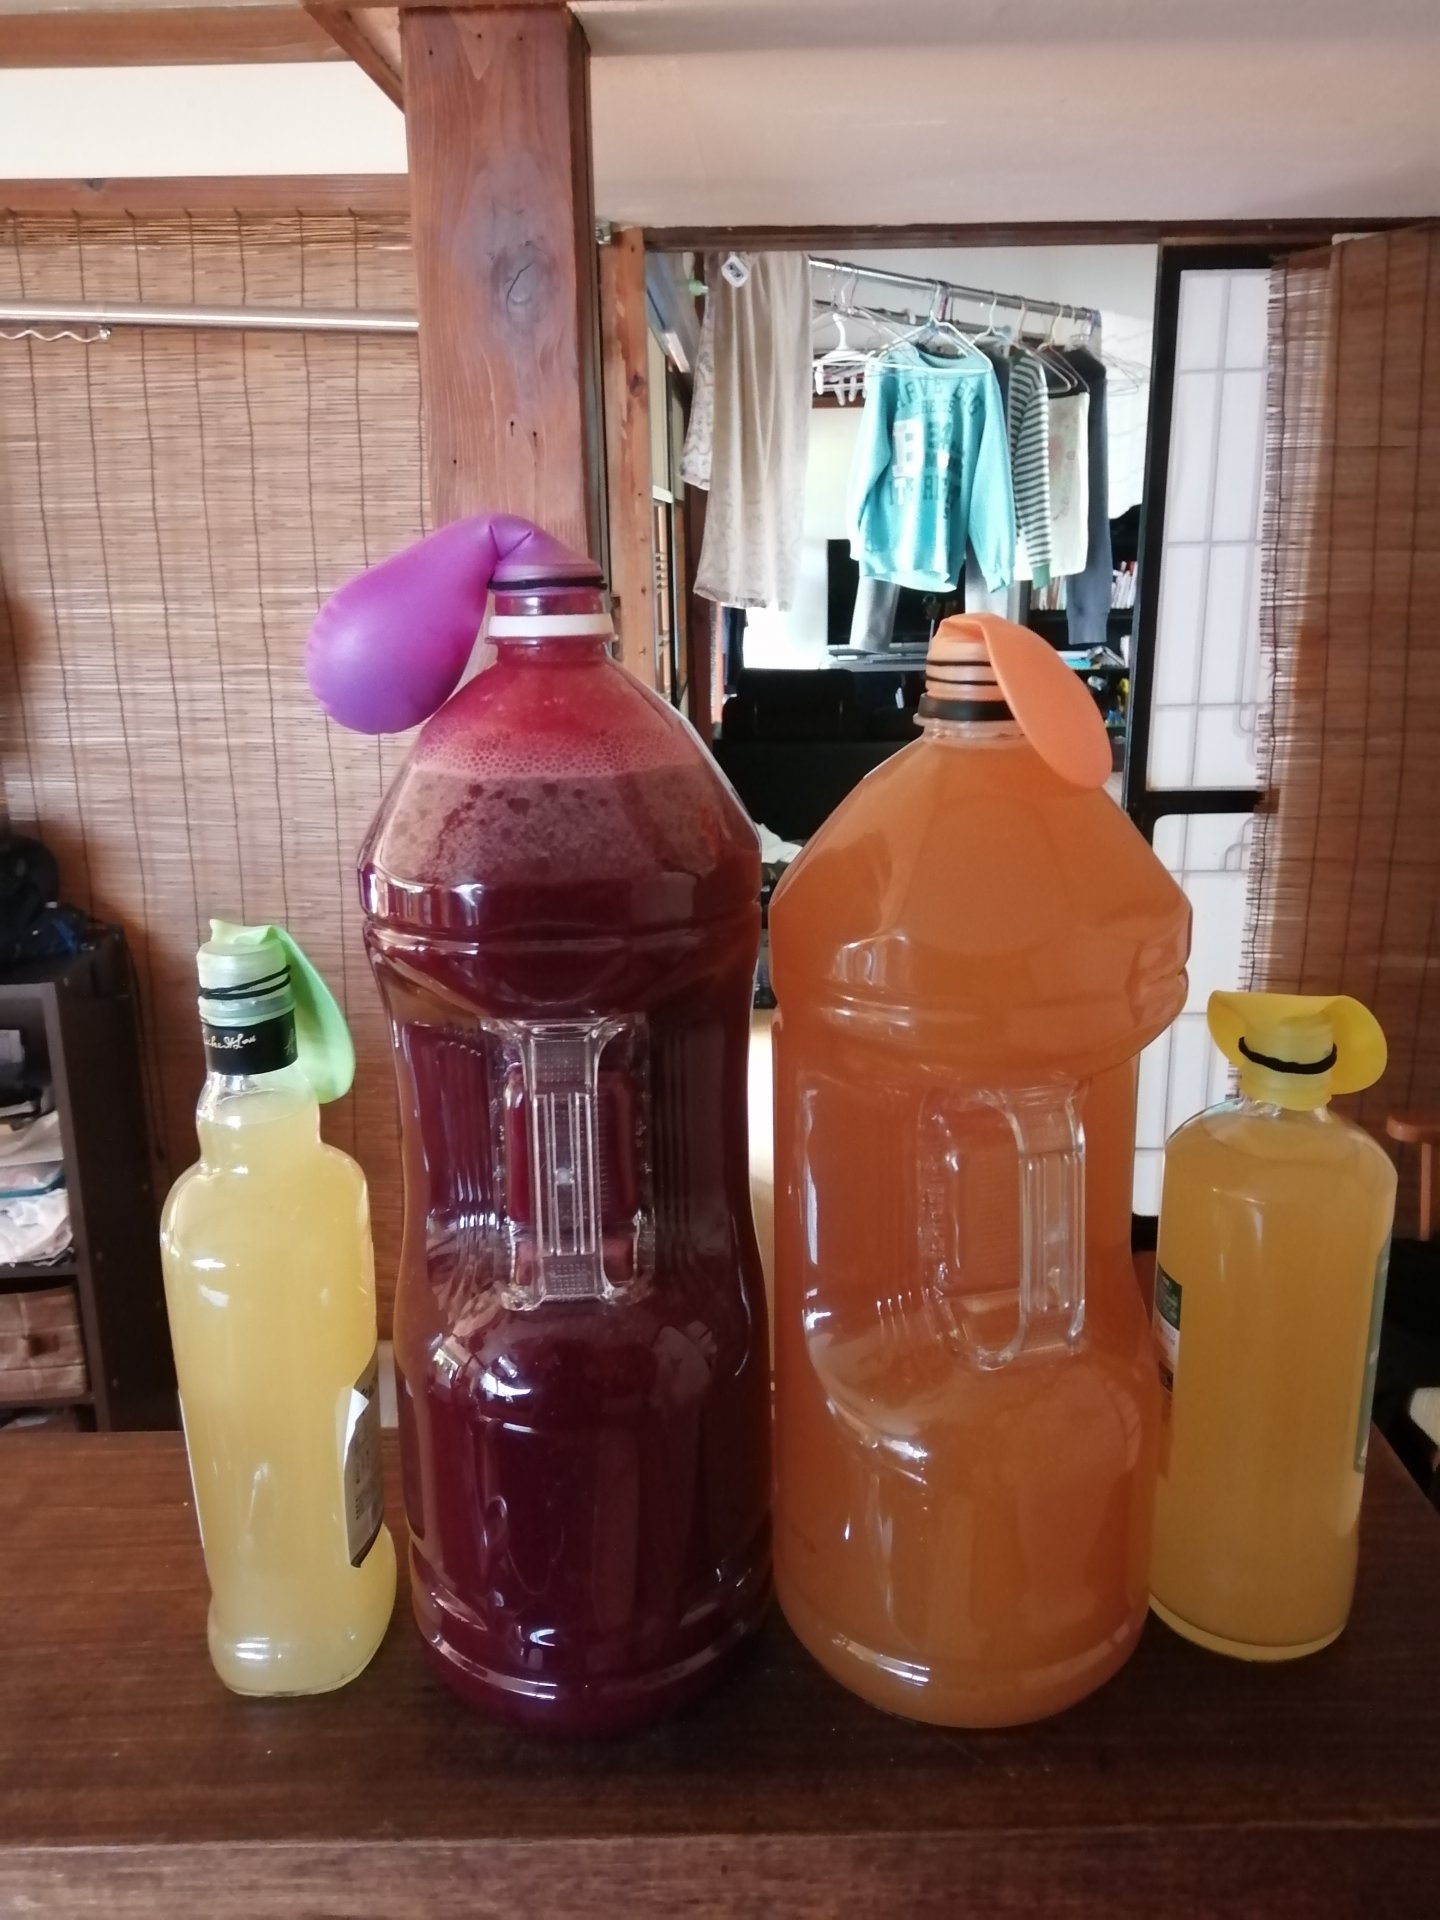 Berry, apple, and pineapple wine beginning to ferment!